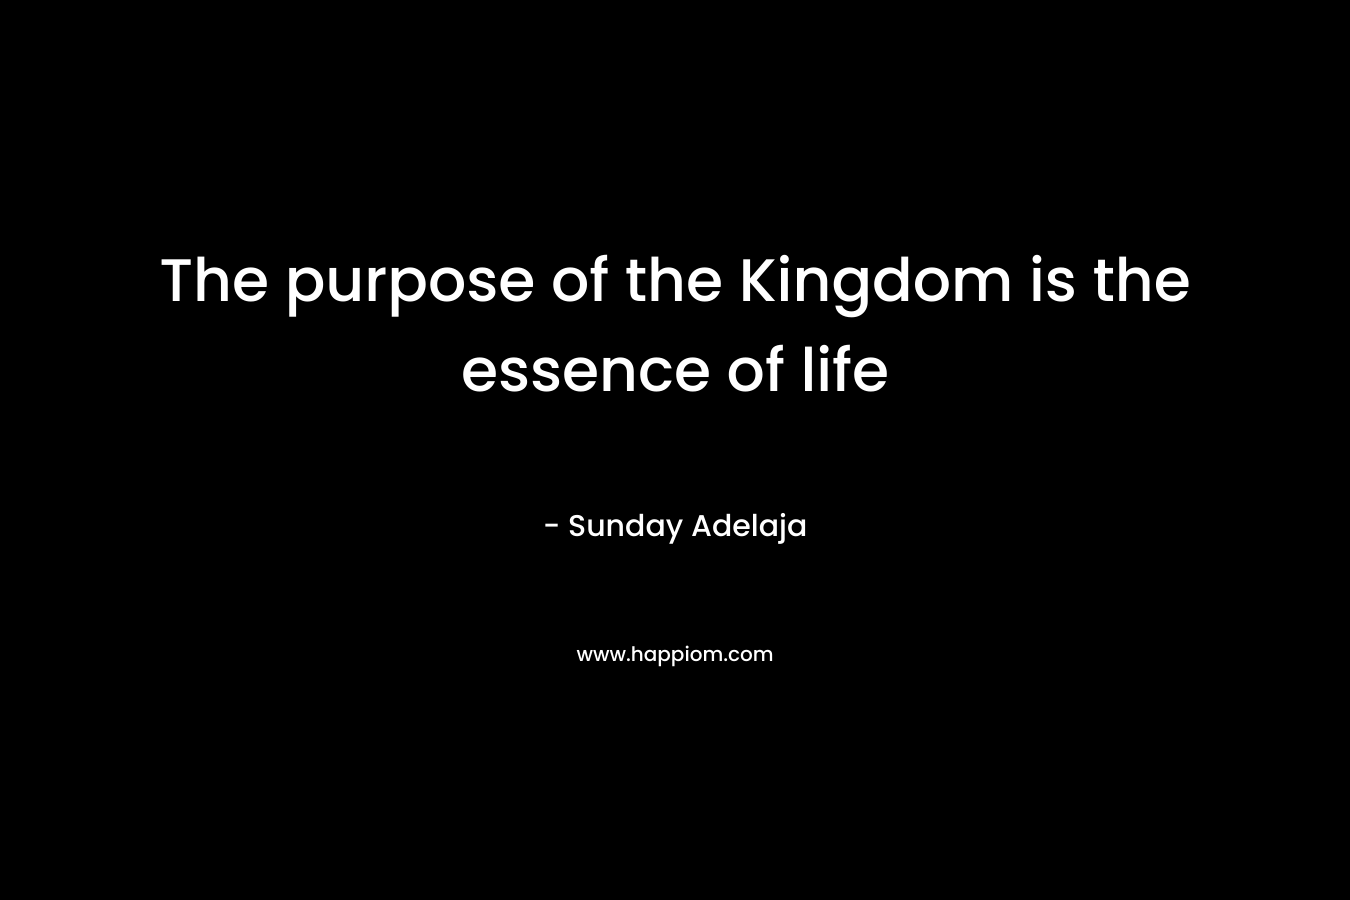 The purpose of the Kingdom is the essence of life